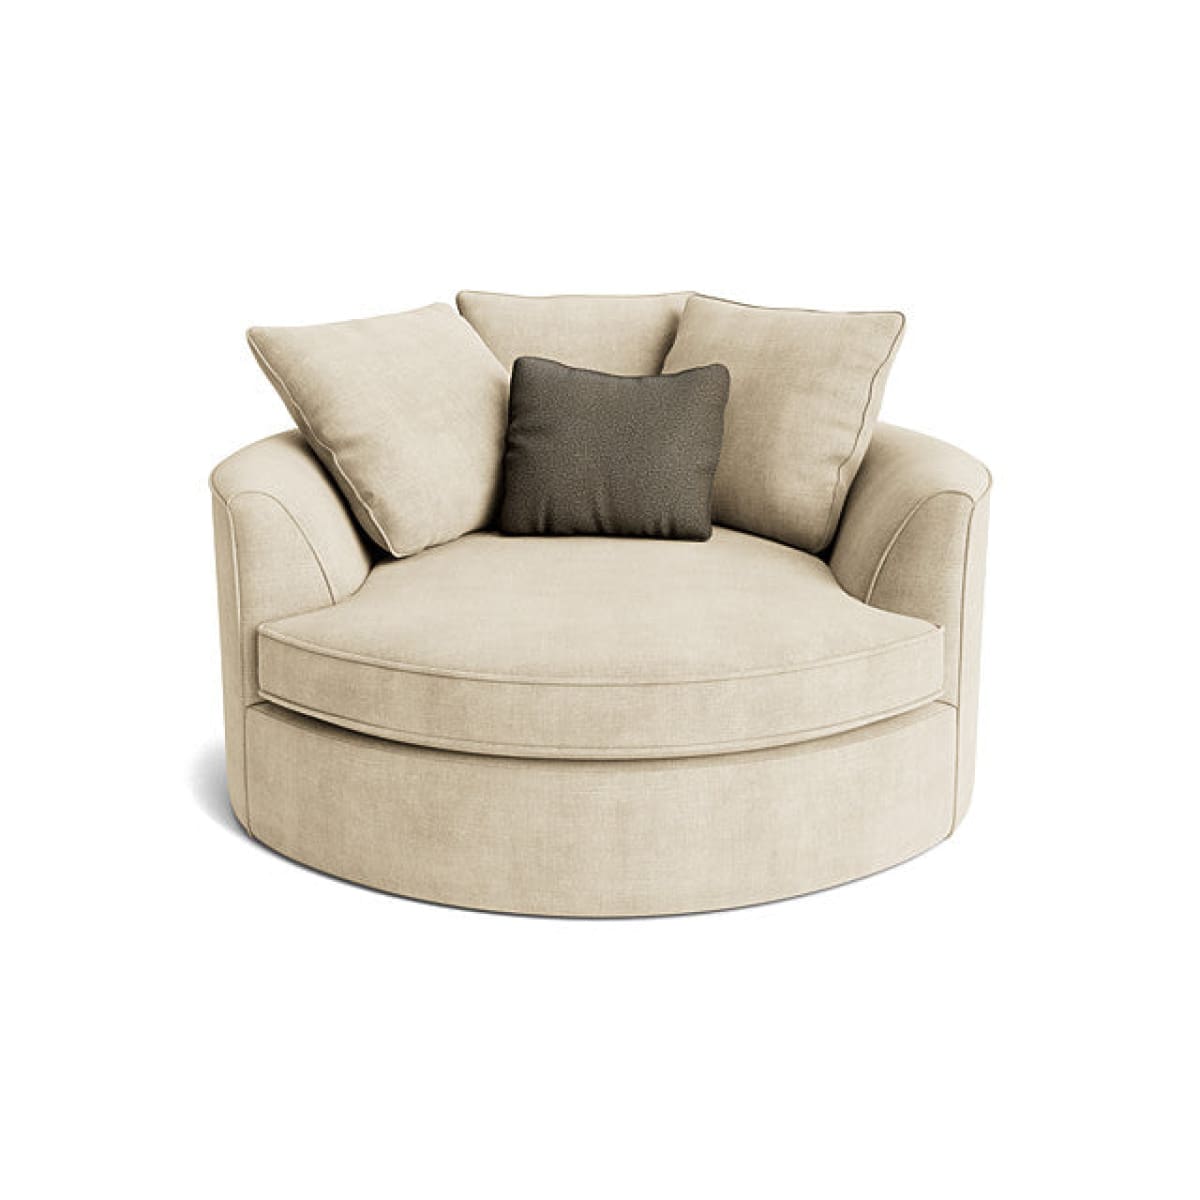 Nest Accent Chair - Analogy Sand